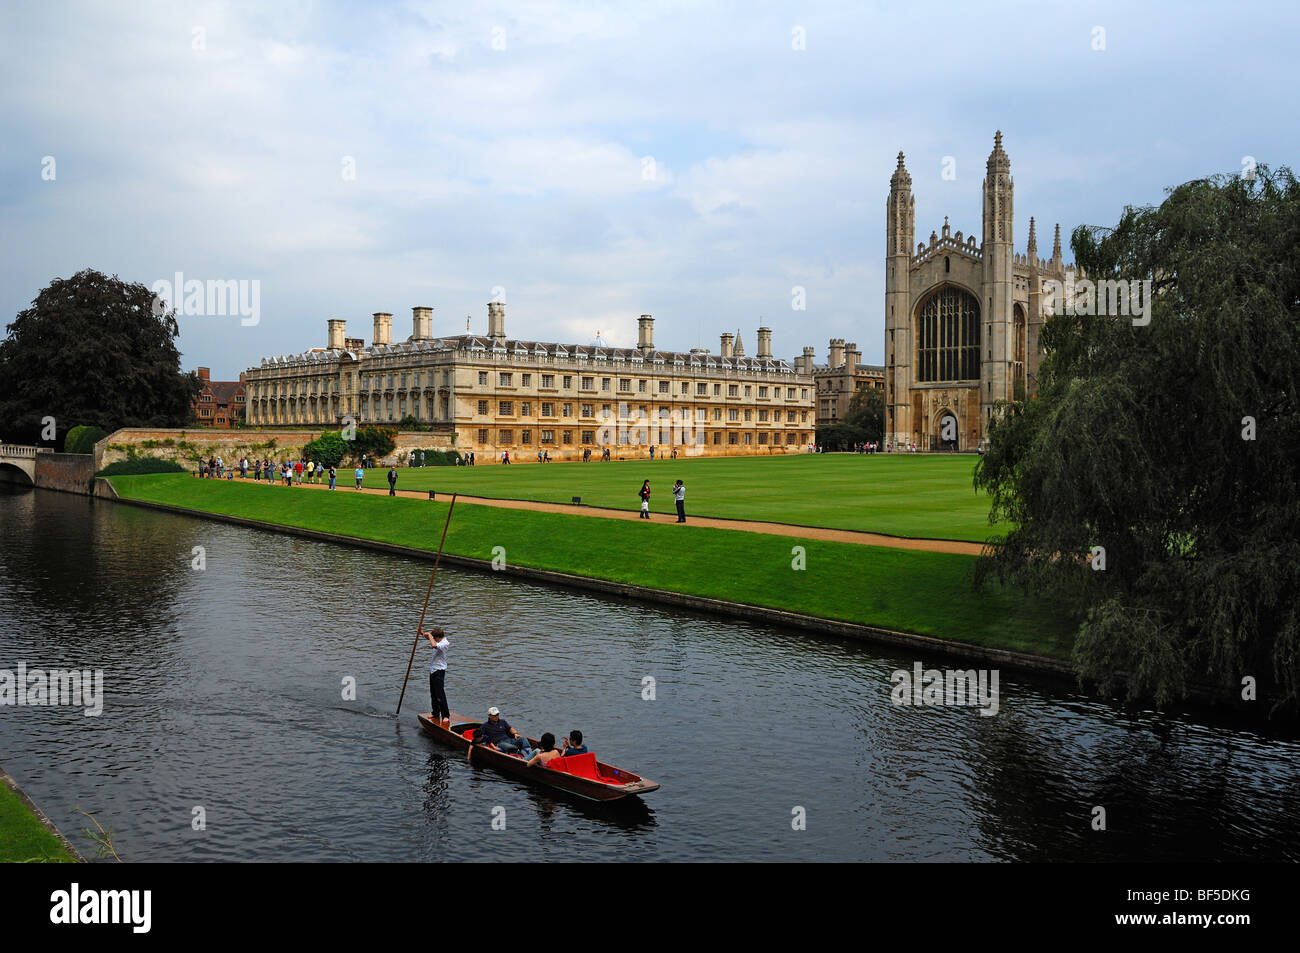 Cruise on the Cam river, called Punting, with building and chapel of King's College, King's Parade, Cambridge, Cambridgeshire,  Stock Photo